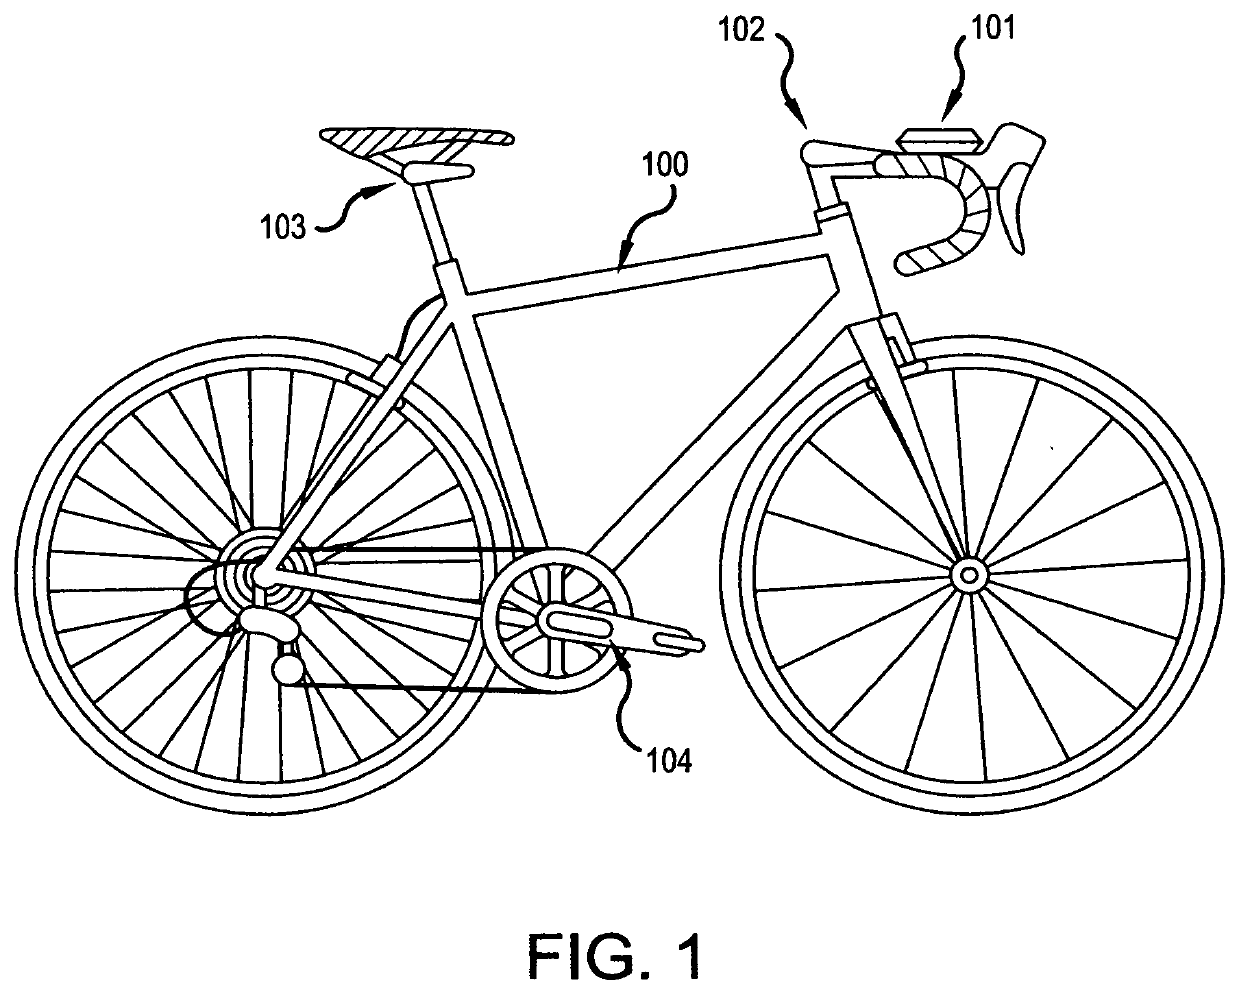 Powered, programmable machine and method for transforming a bicycle to fit particular riders and/or riding conditions